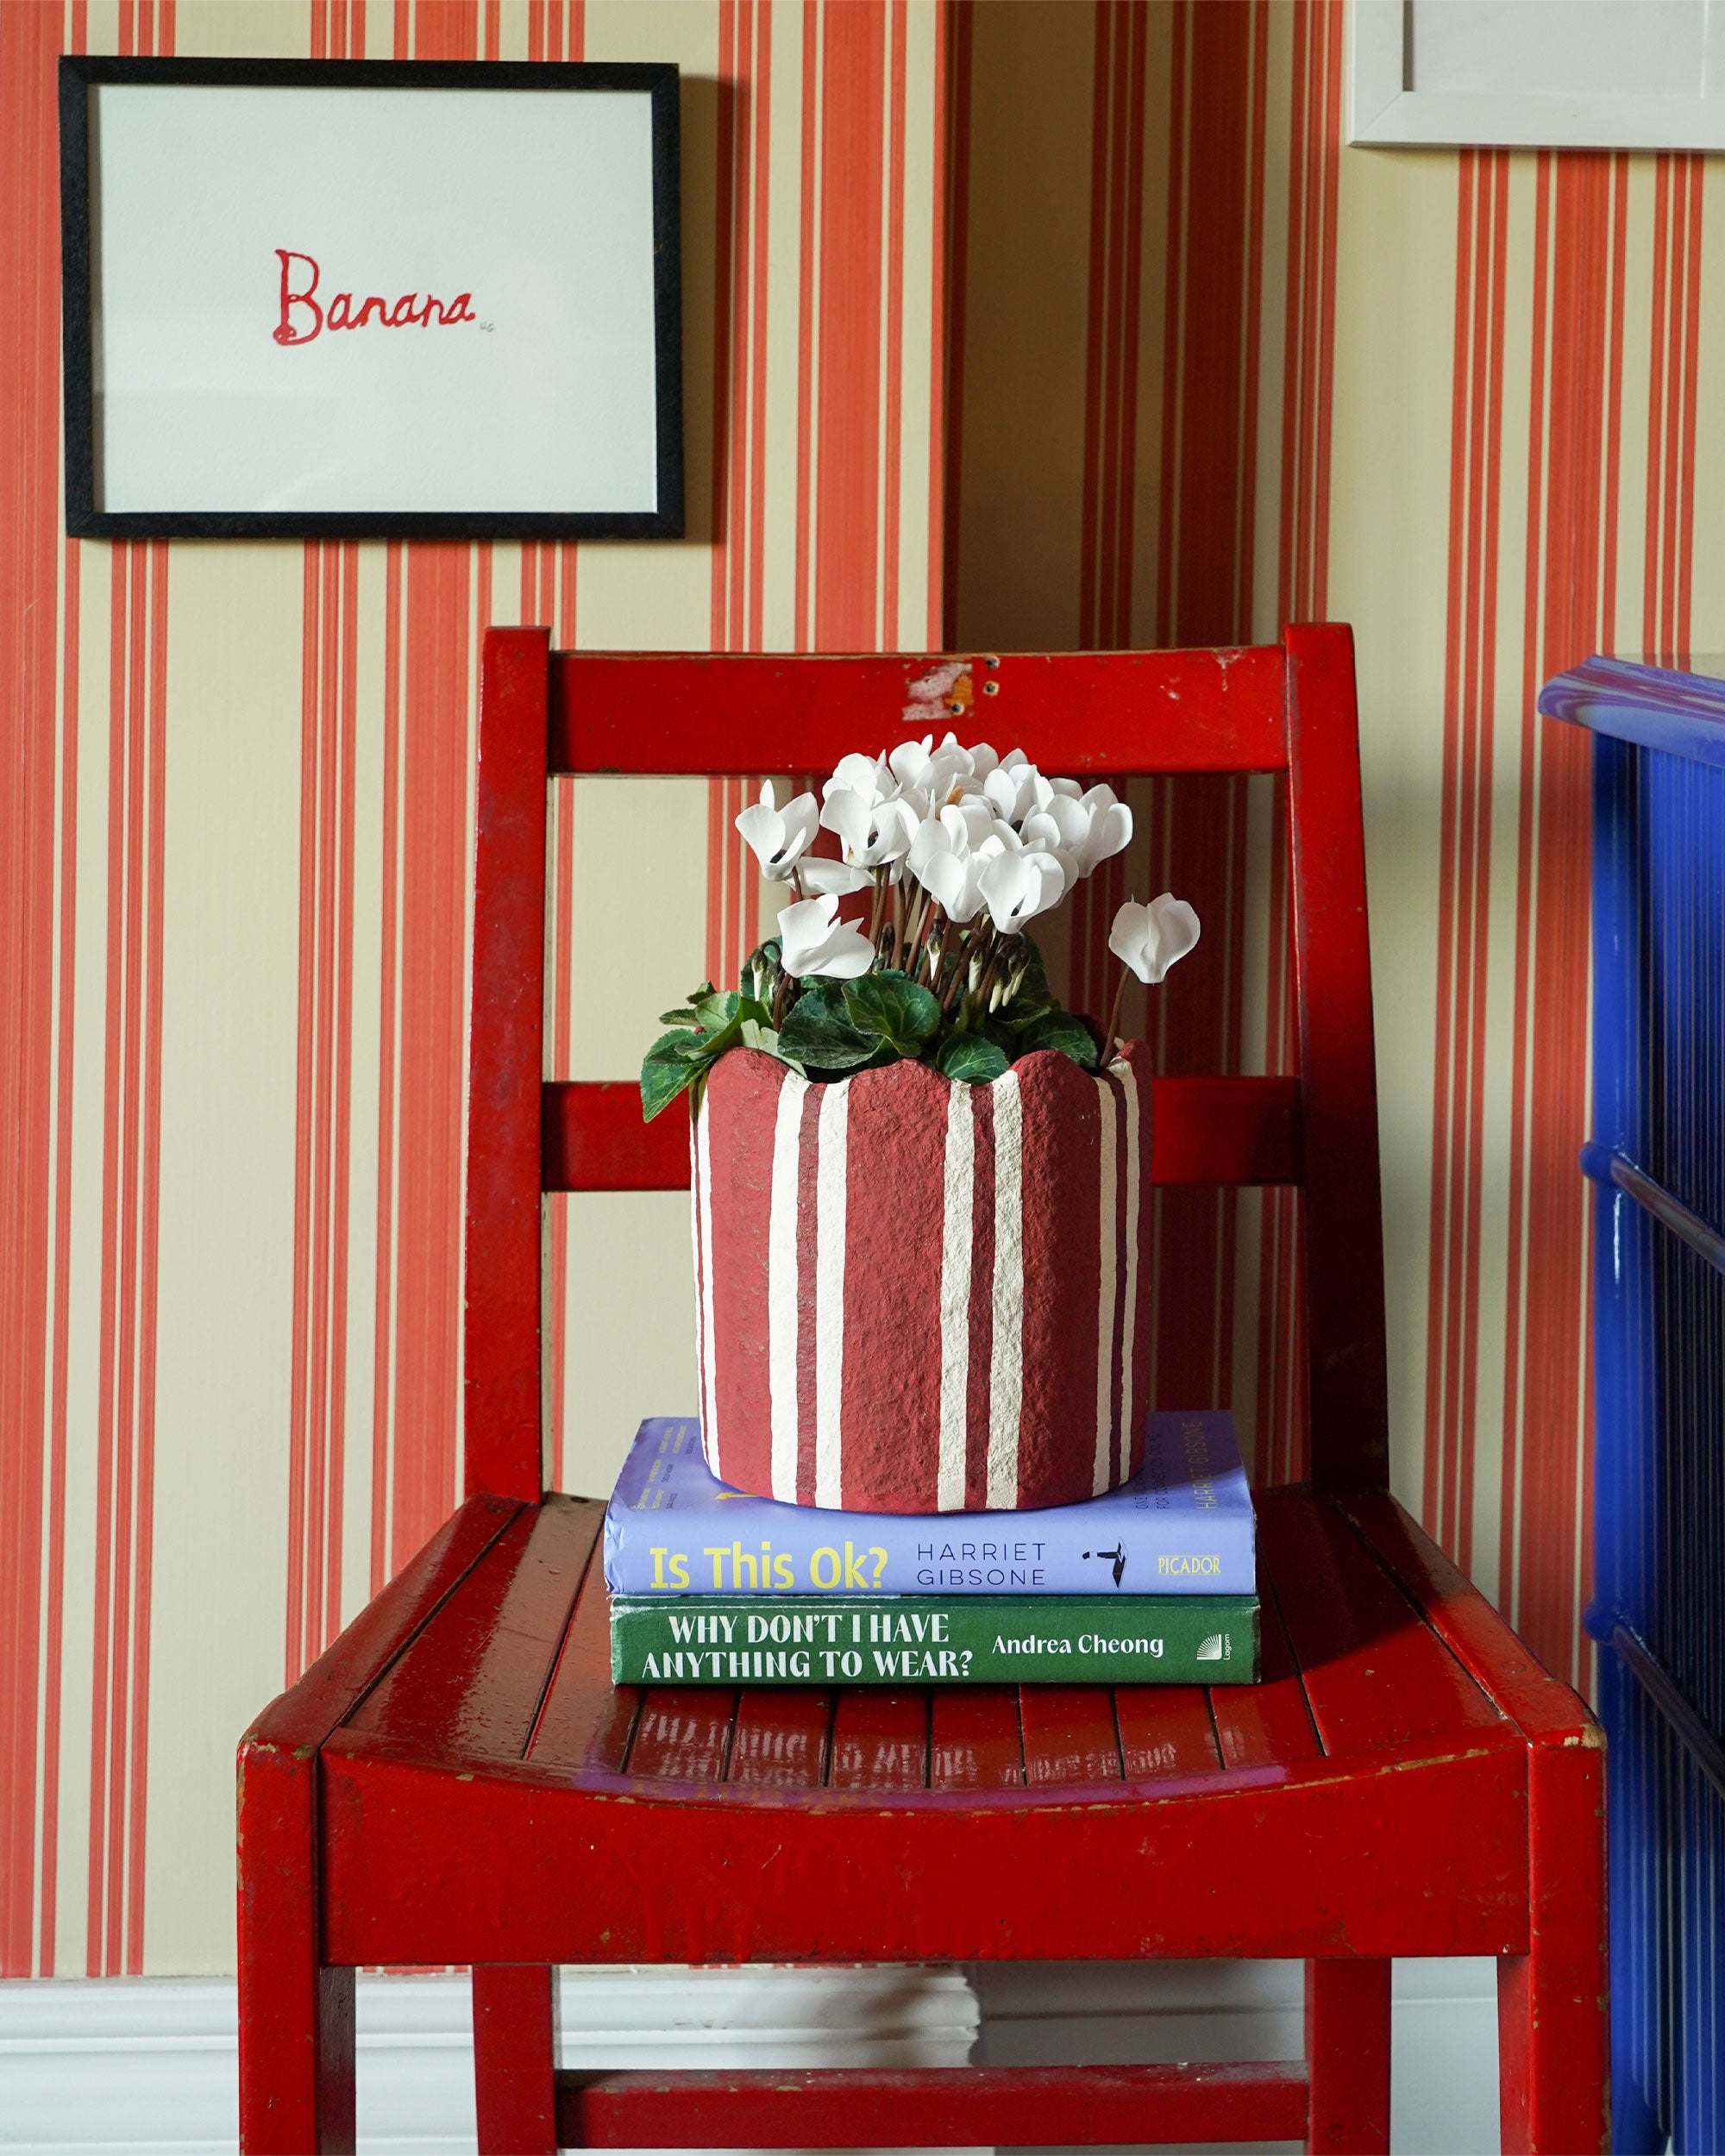 The Forever Stripey Planter - The Red